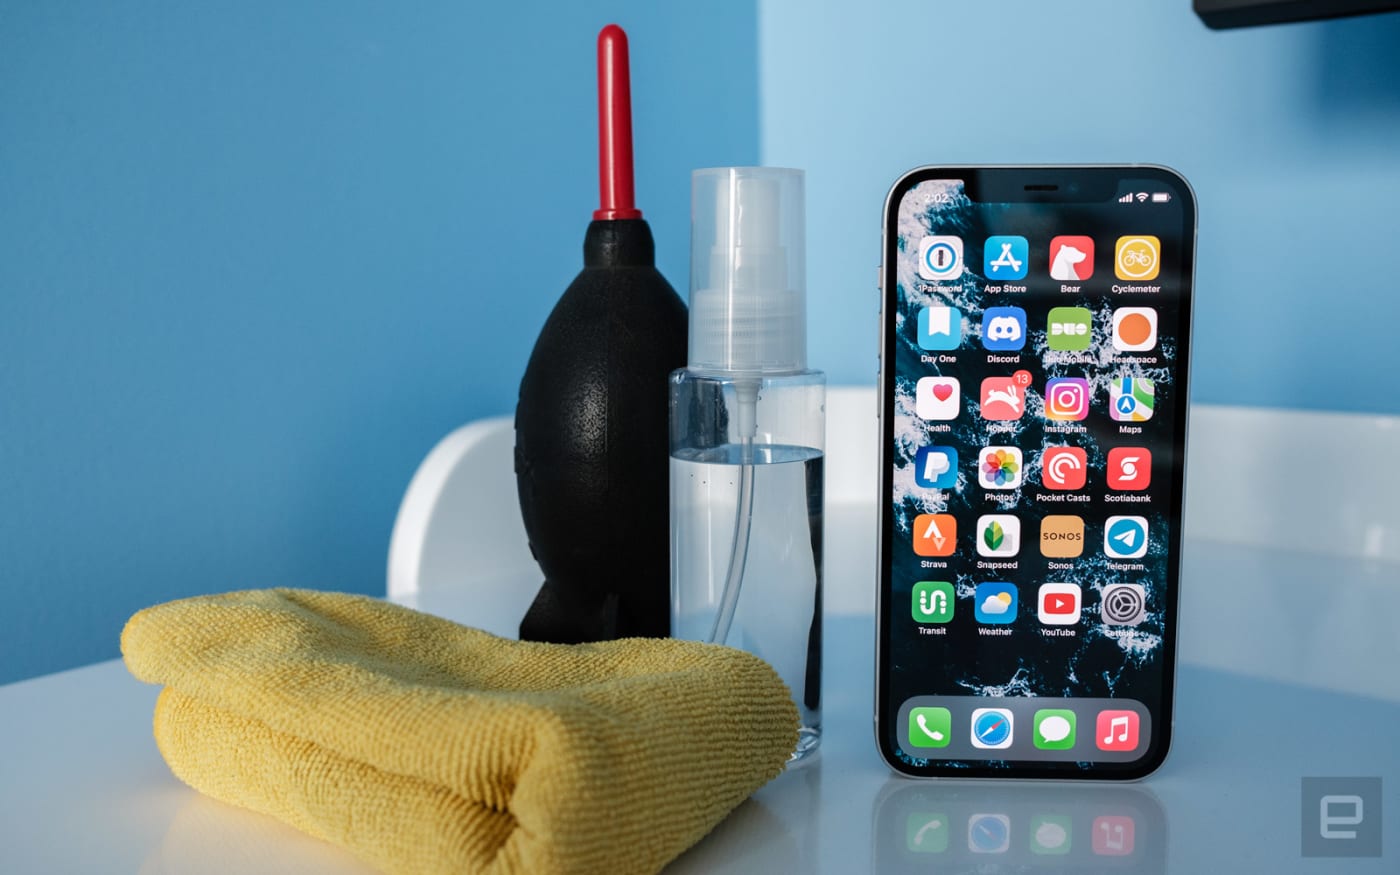 The Morning After: Our guide to spring cleaning your tech